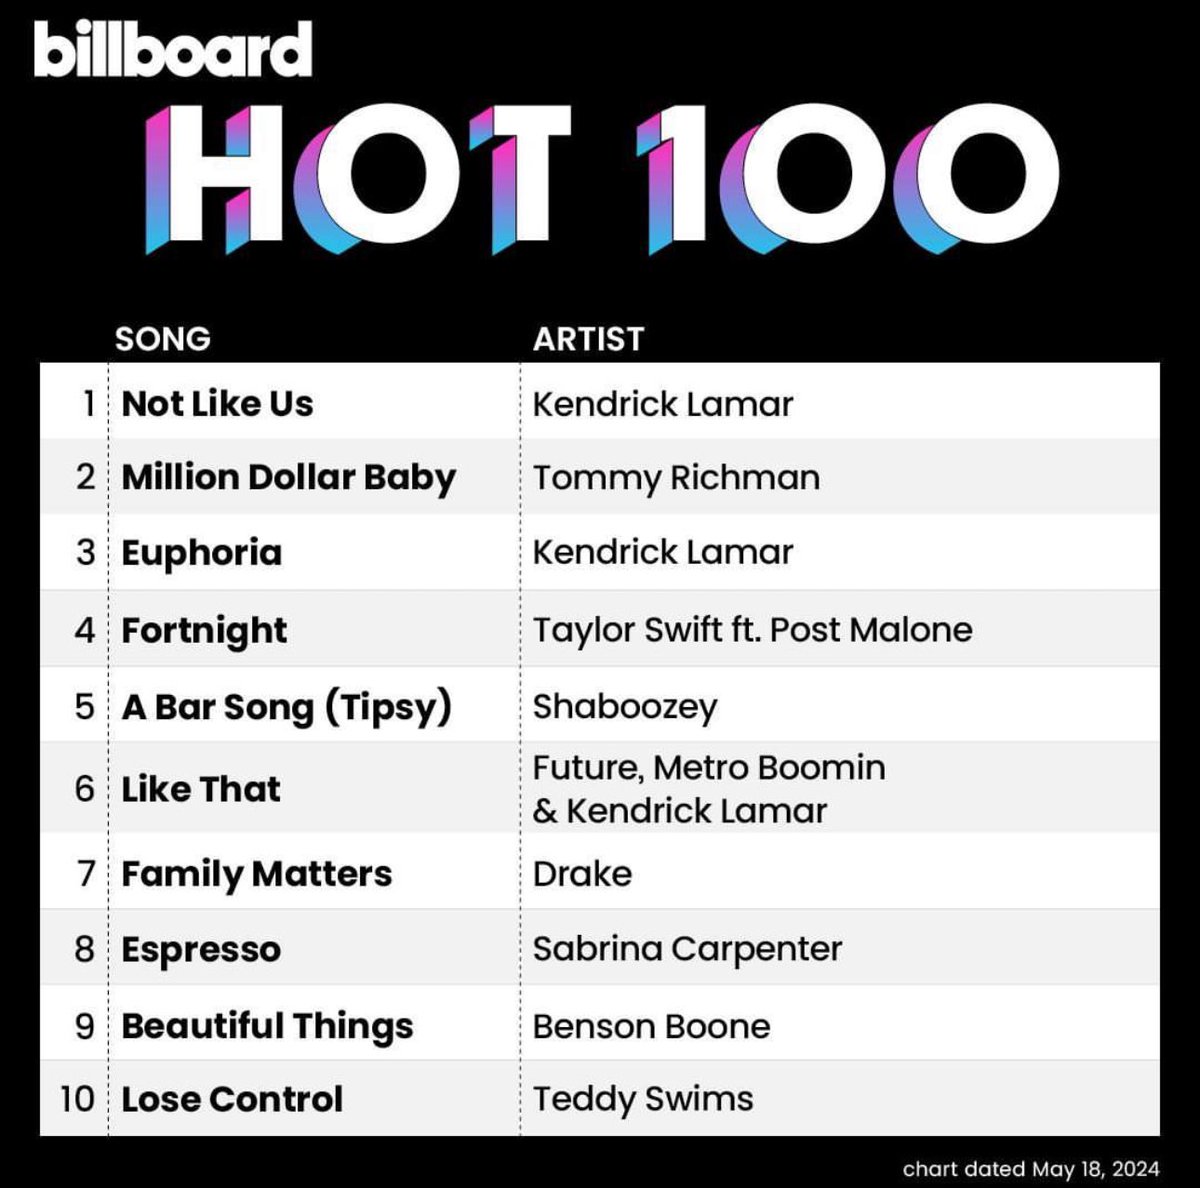 The Top 10 of this week’s Billboard Hot 100.